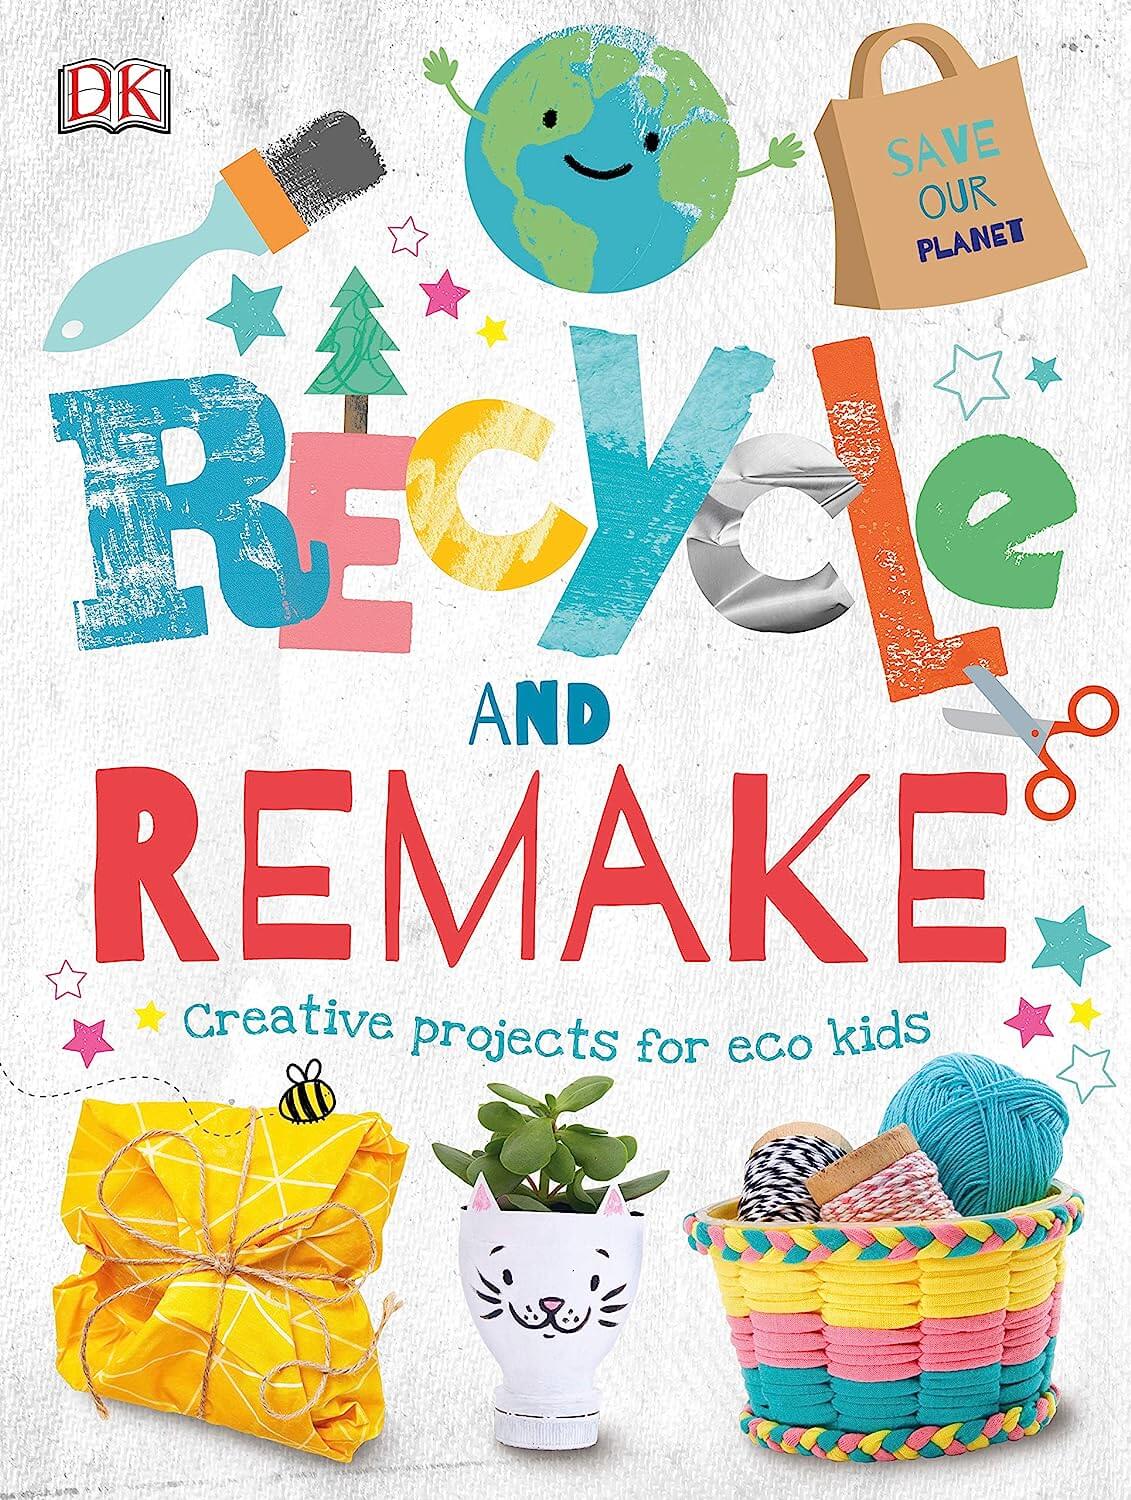 Recycle and Remake: Creative projects for Eco kids by Dk Publishing